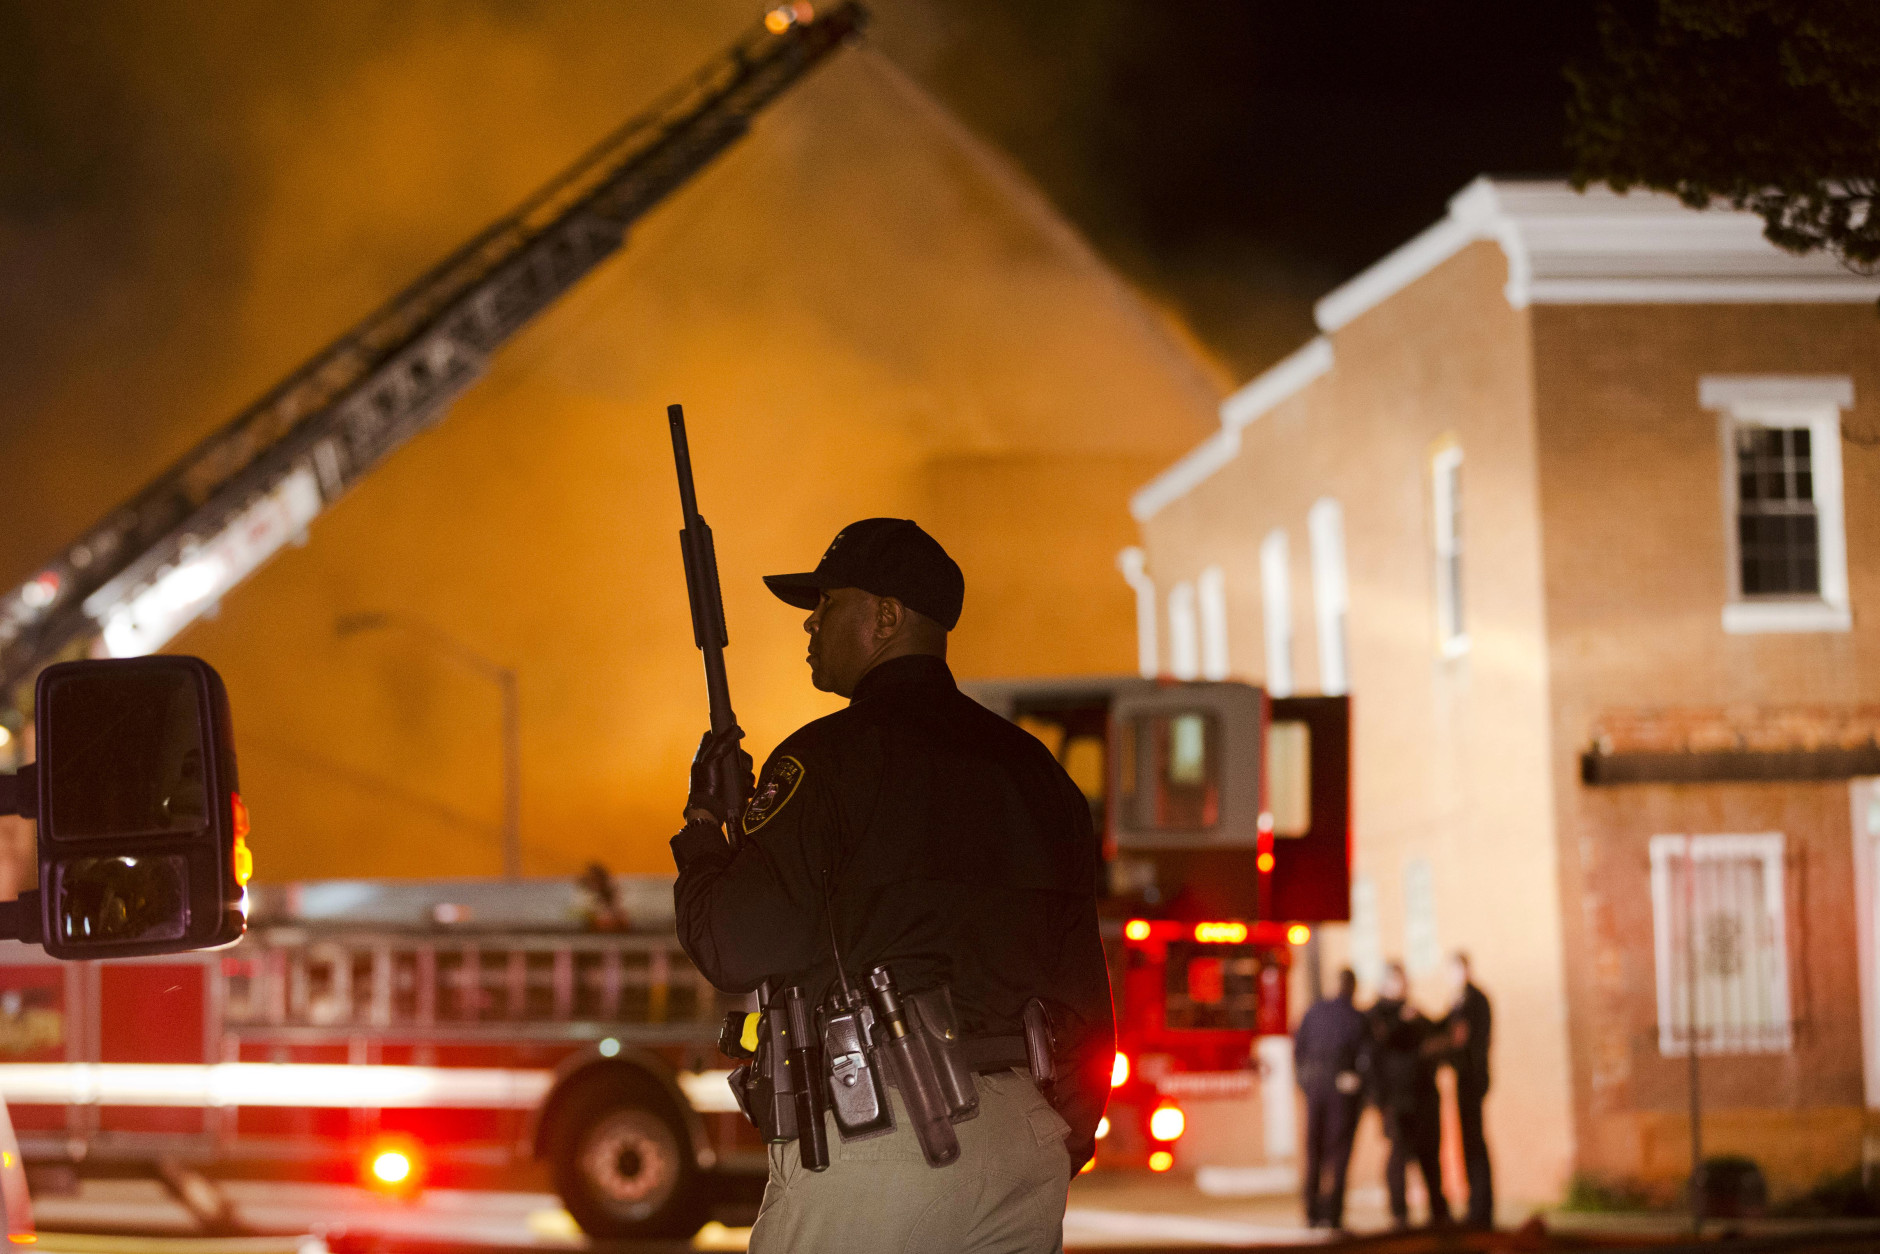 An officer stands near a blaze, Monday, April 27, 2015, after rioters plunged part of Baltimore into chaos, torching a pharmacy, setting police cars ablaze and throwing bricks at officers. (AP Photo/Matt Rourke)